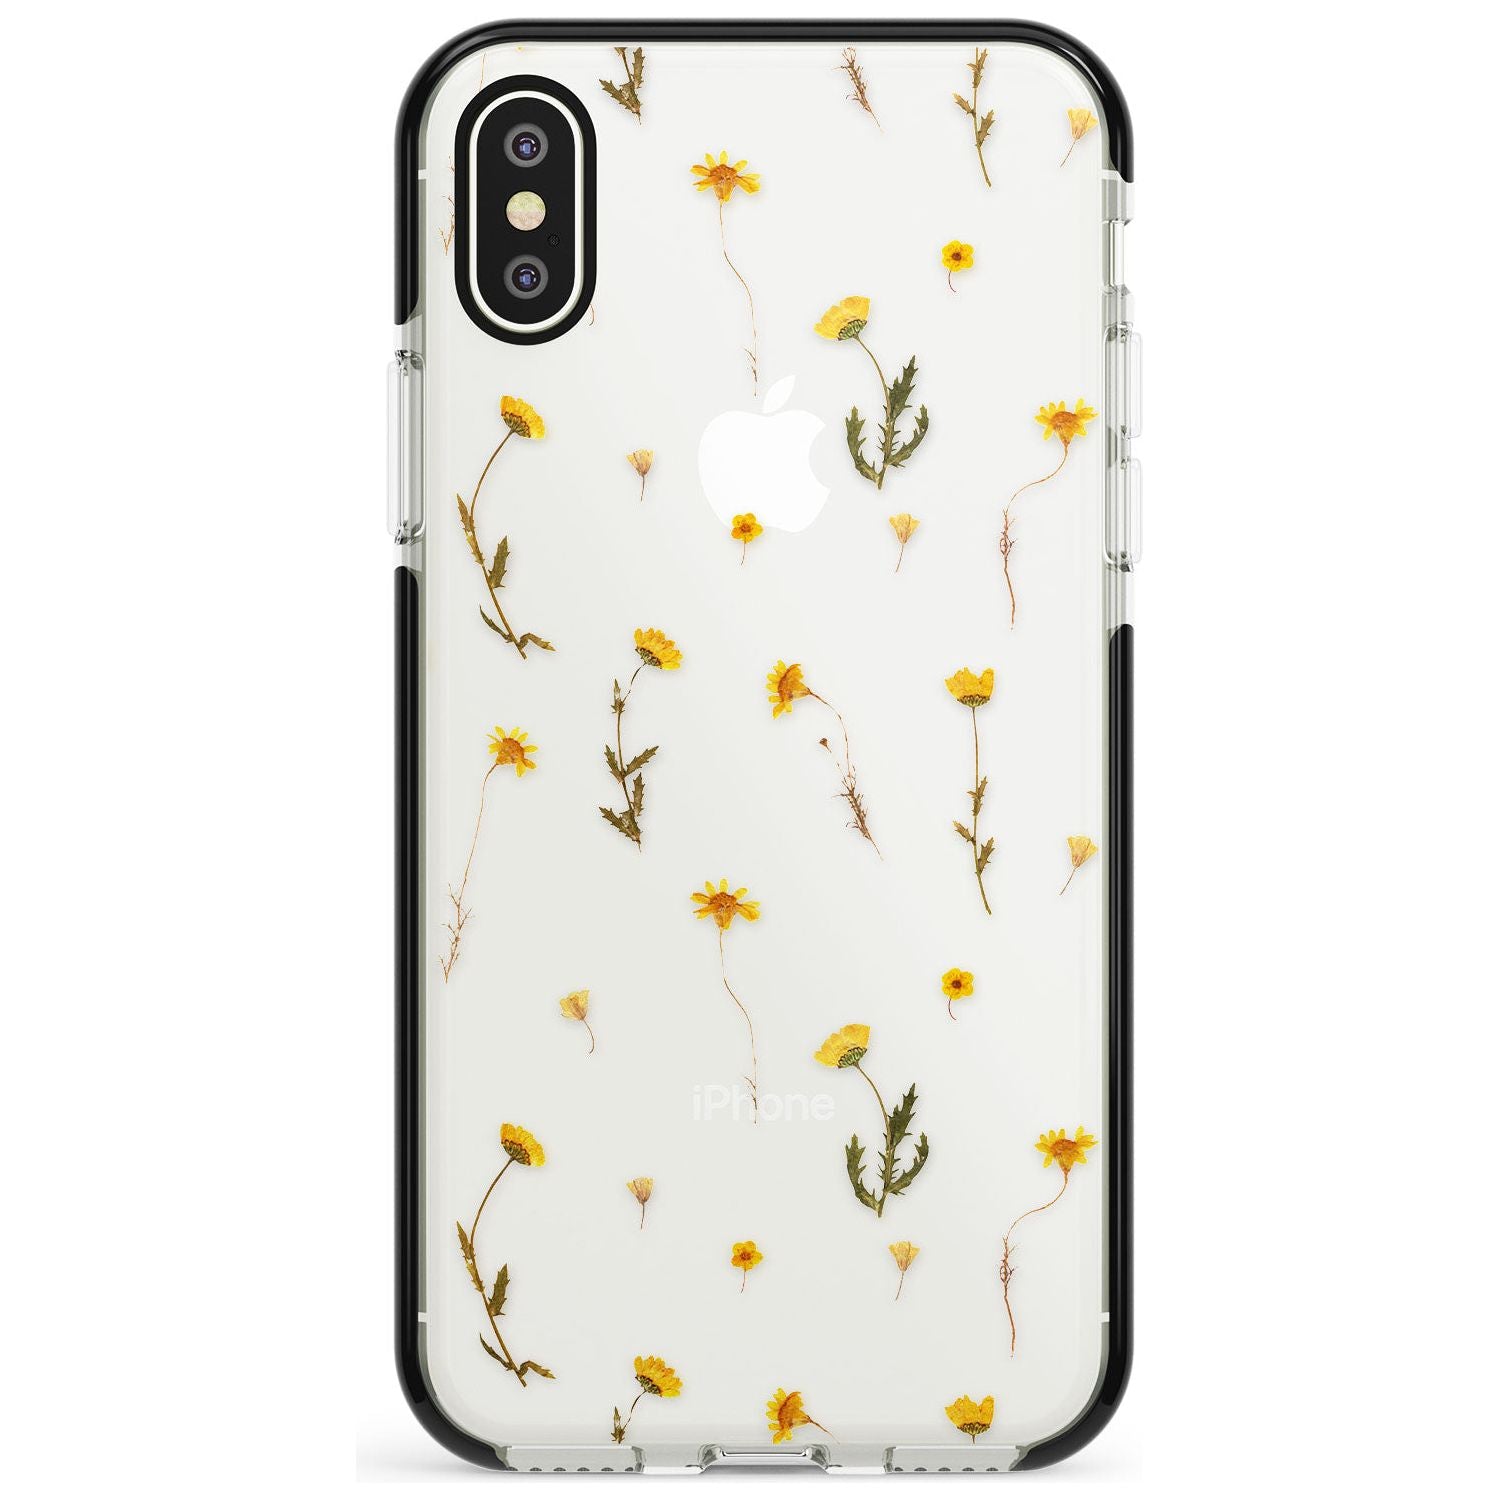 Mixed Yellow Flowers - Dried Flower-Inspired Black Impact Phone Case for iPhone X XS Max XR